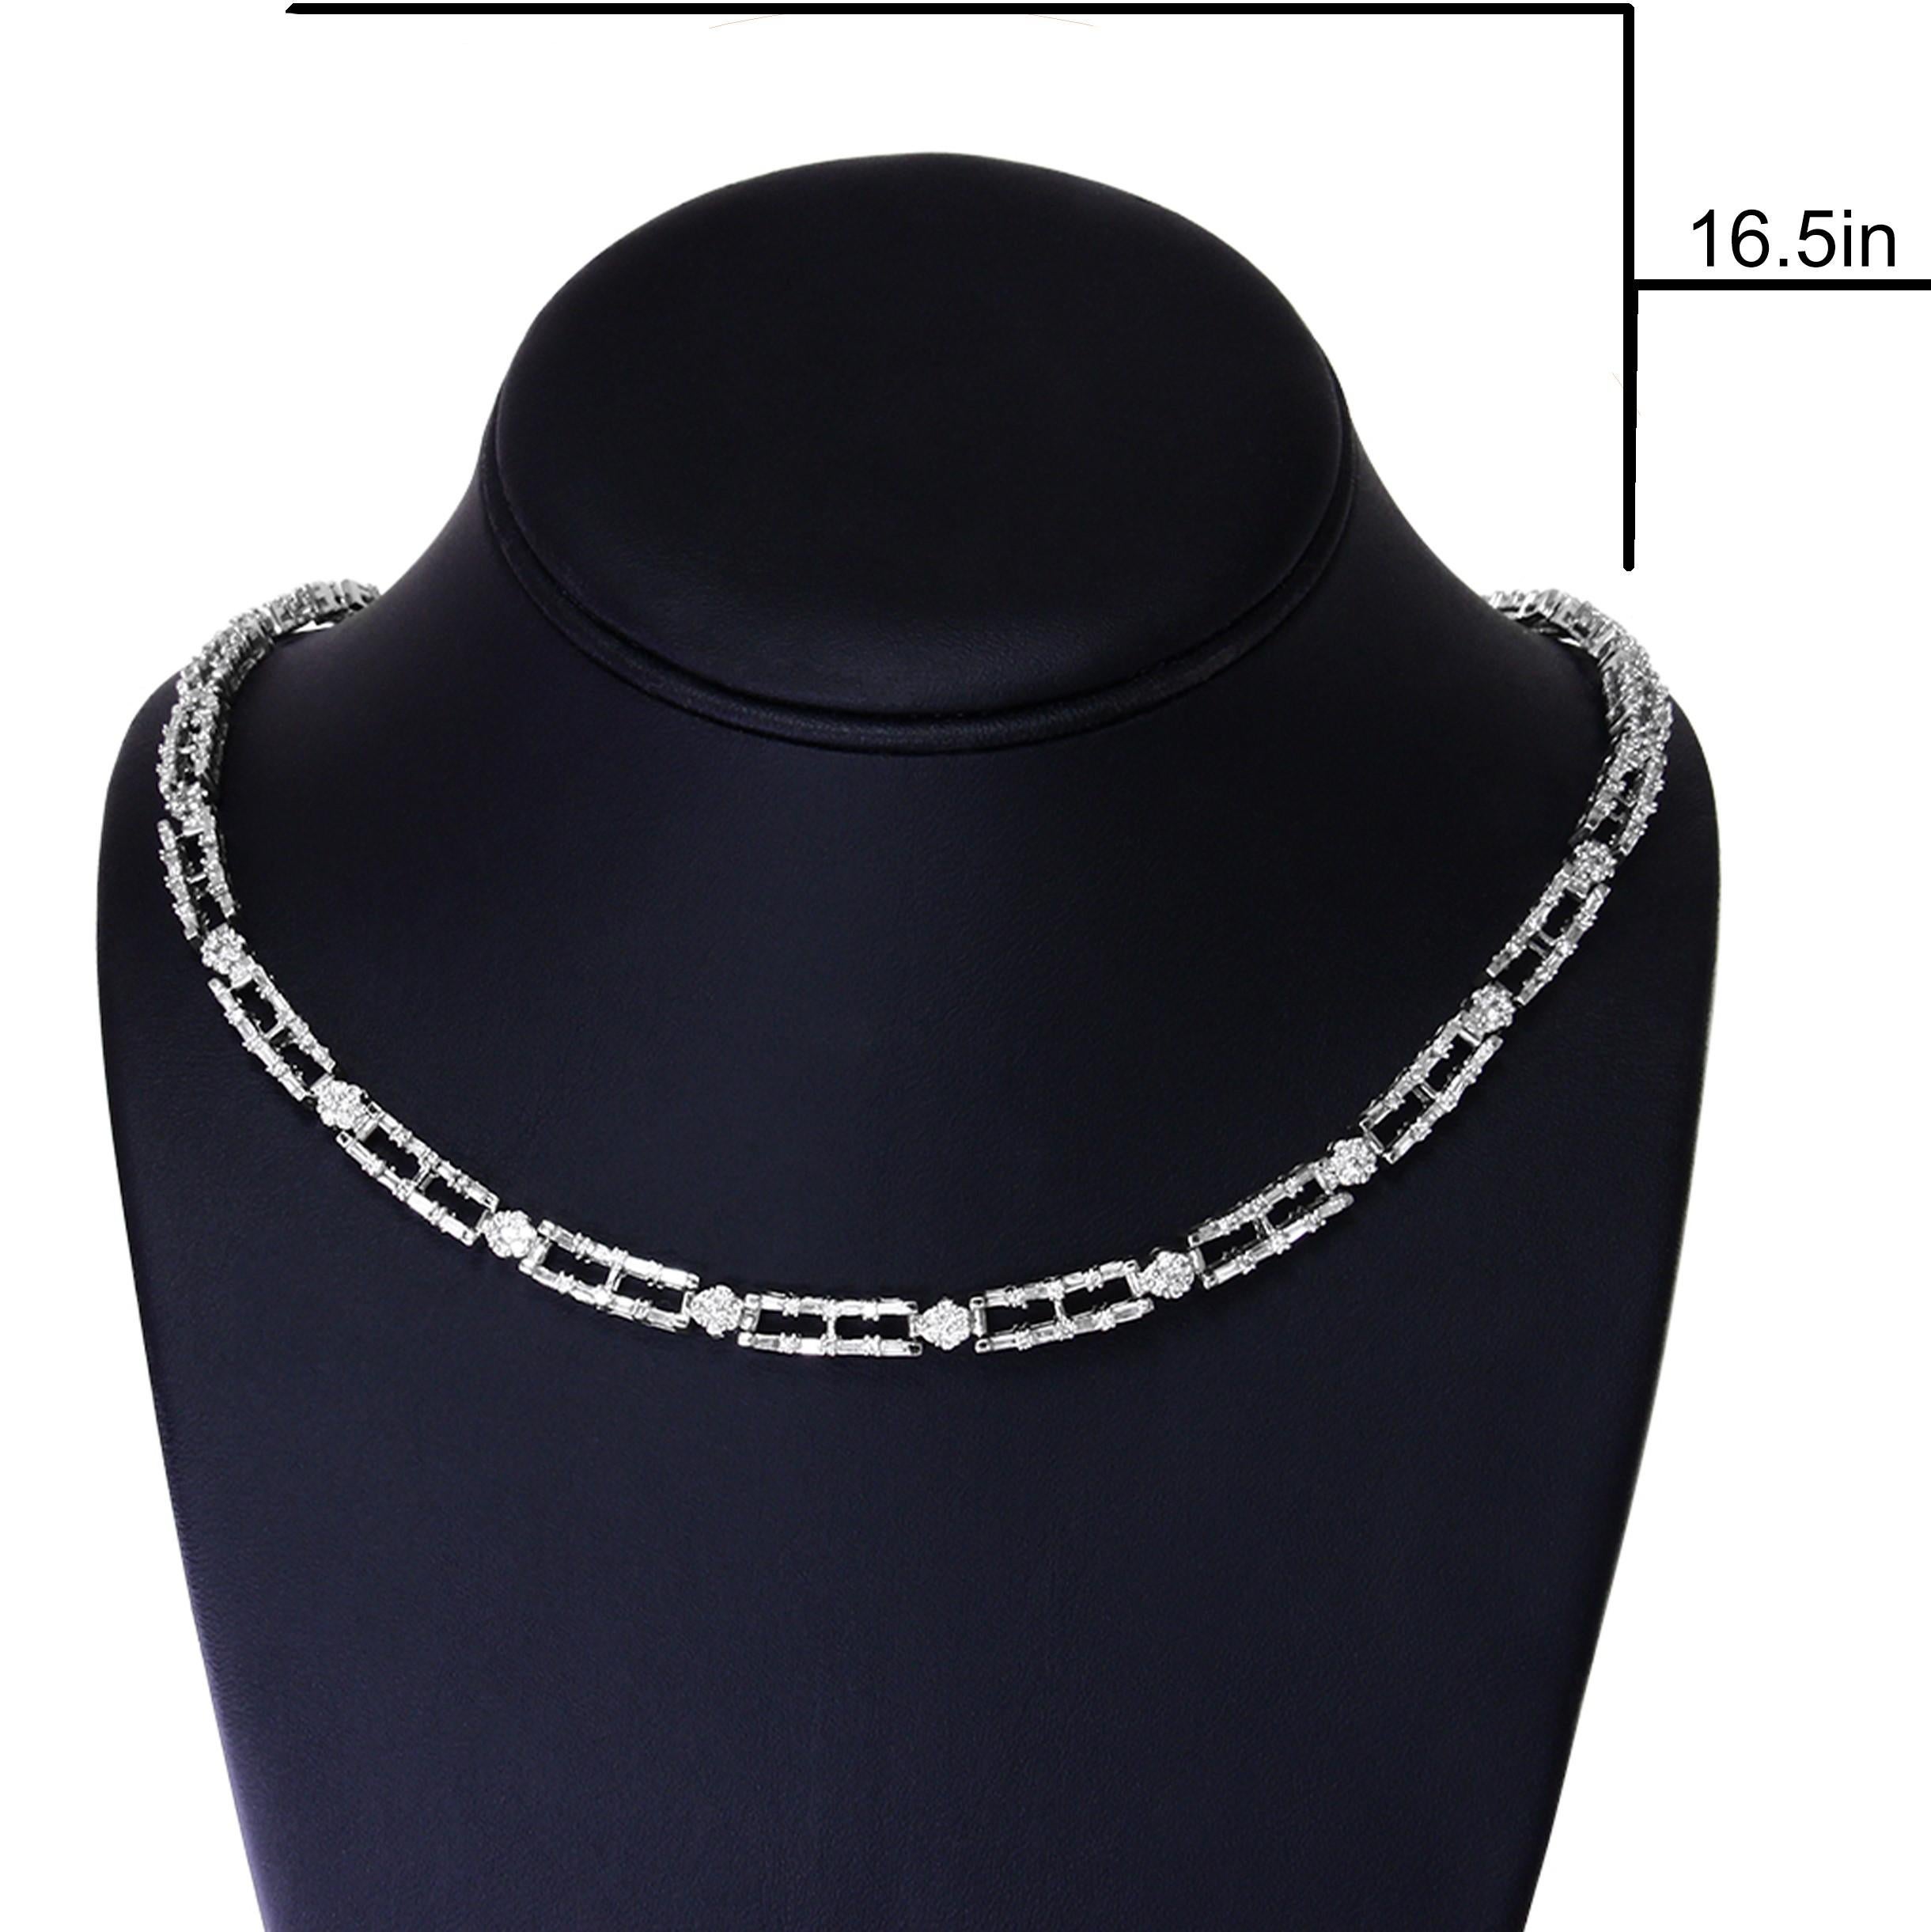 AGS Certified 14K White Gold 8 1/2 Carat Diamond Choker Necklace For Sale 2